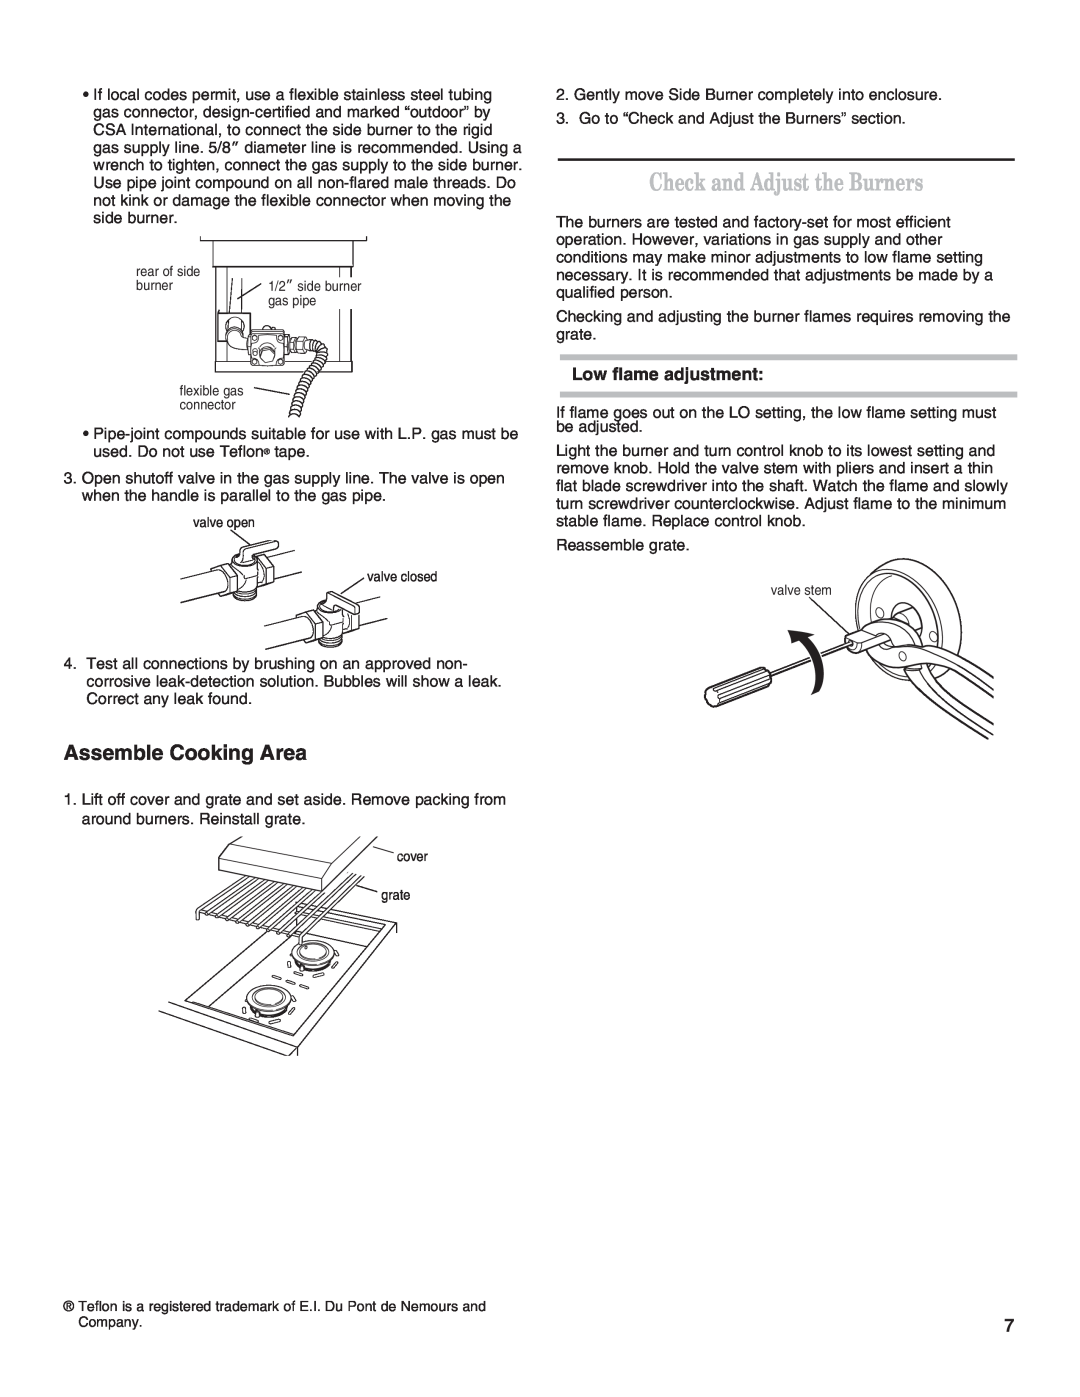 KitchenAid KSBN220SSS installation instructions Check and Adjust the Burners, Assemble Cooking Area, Low flame adjustment 